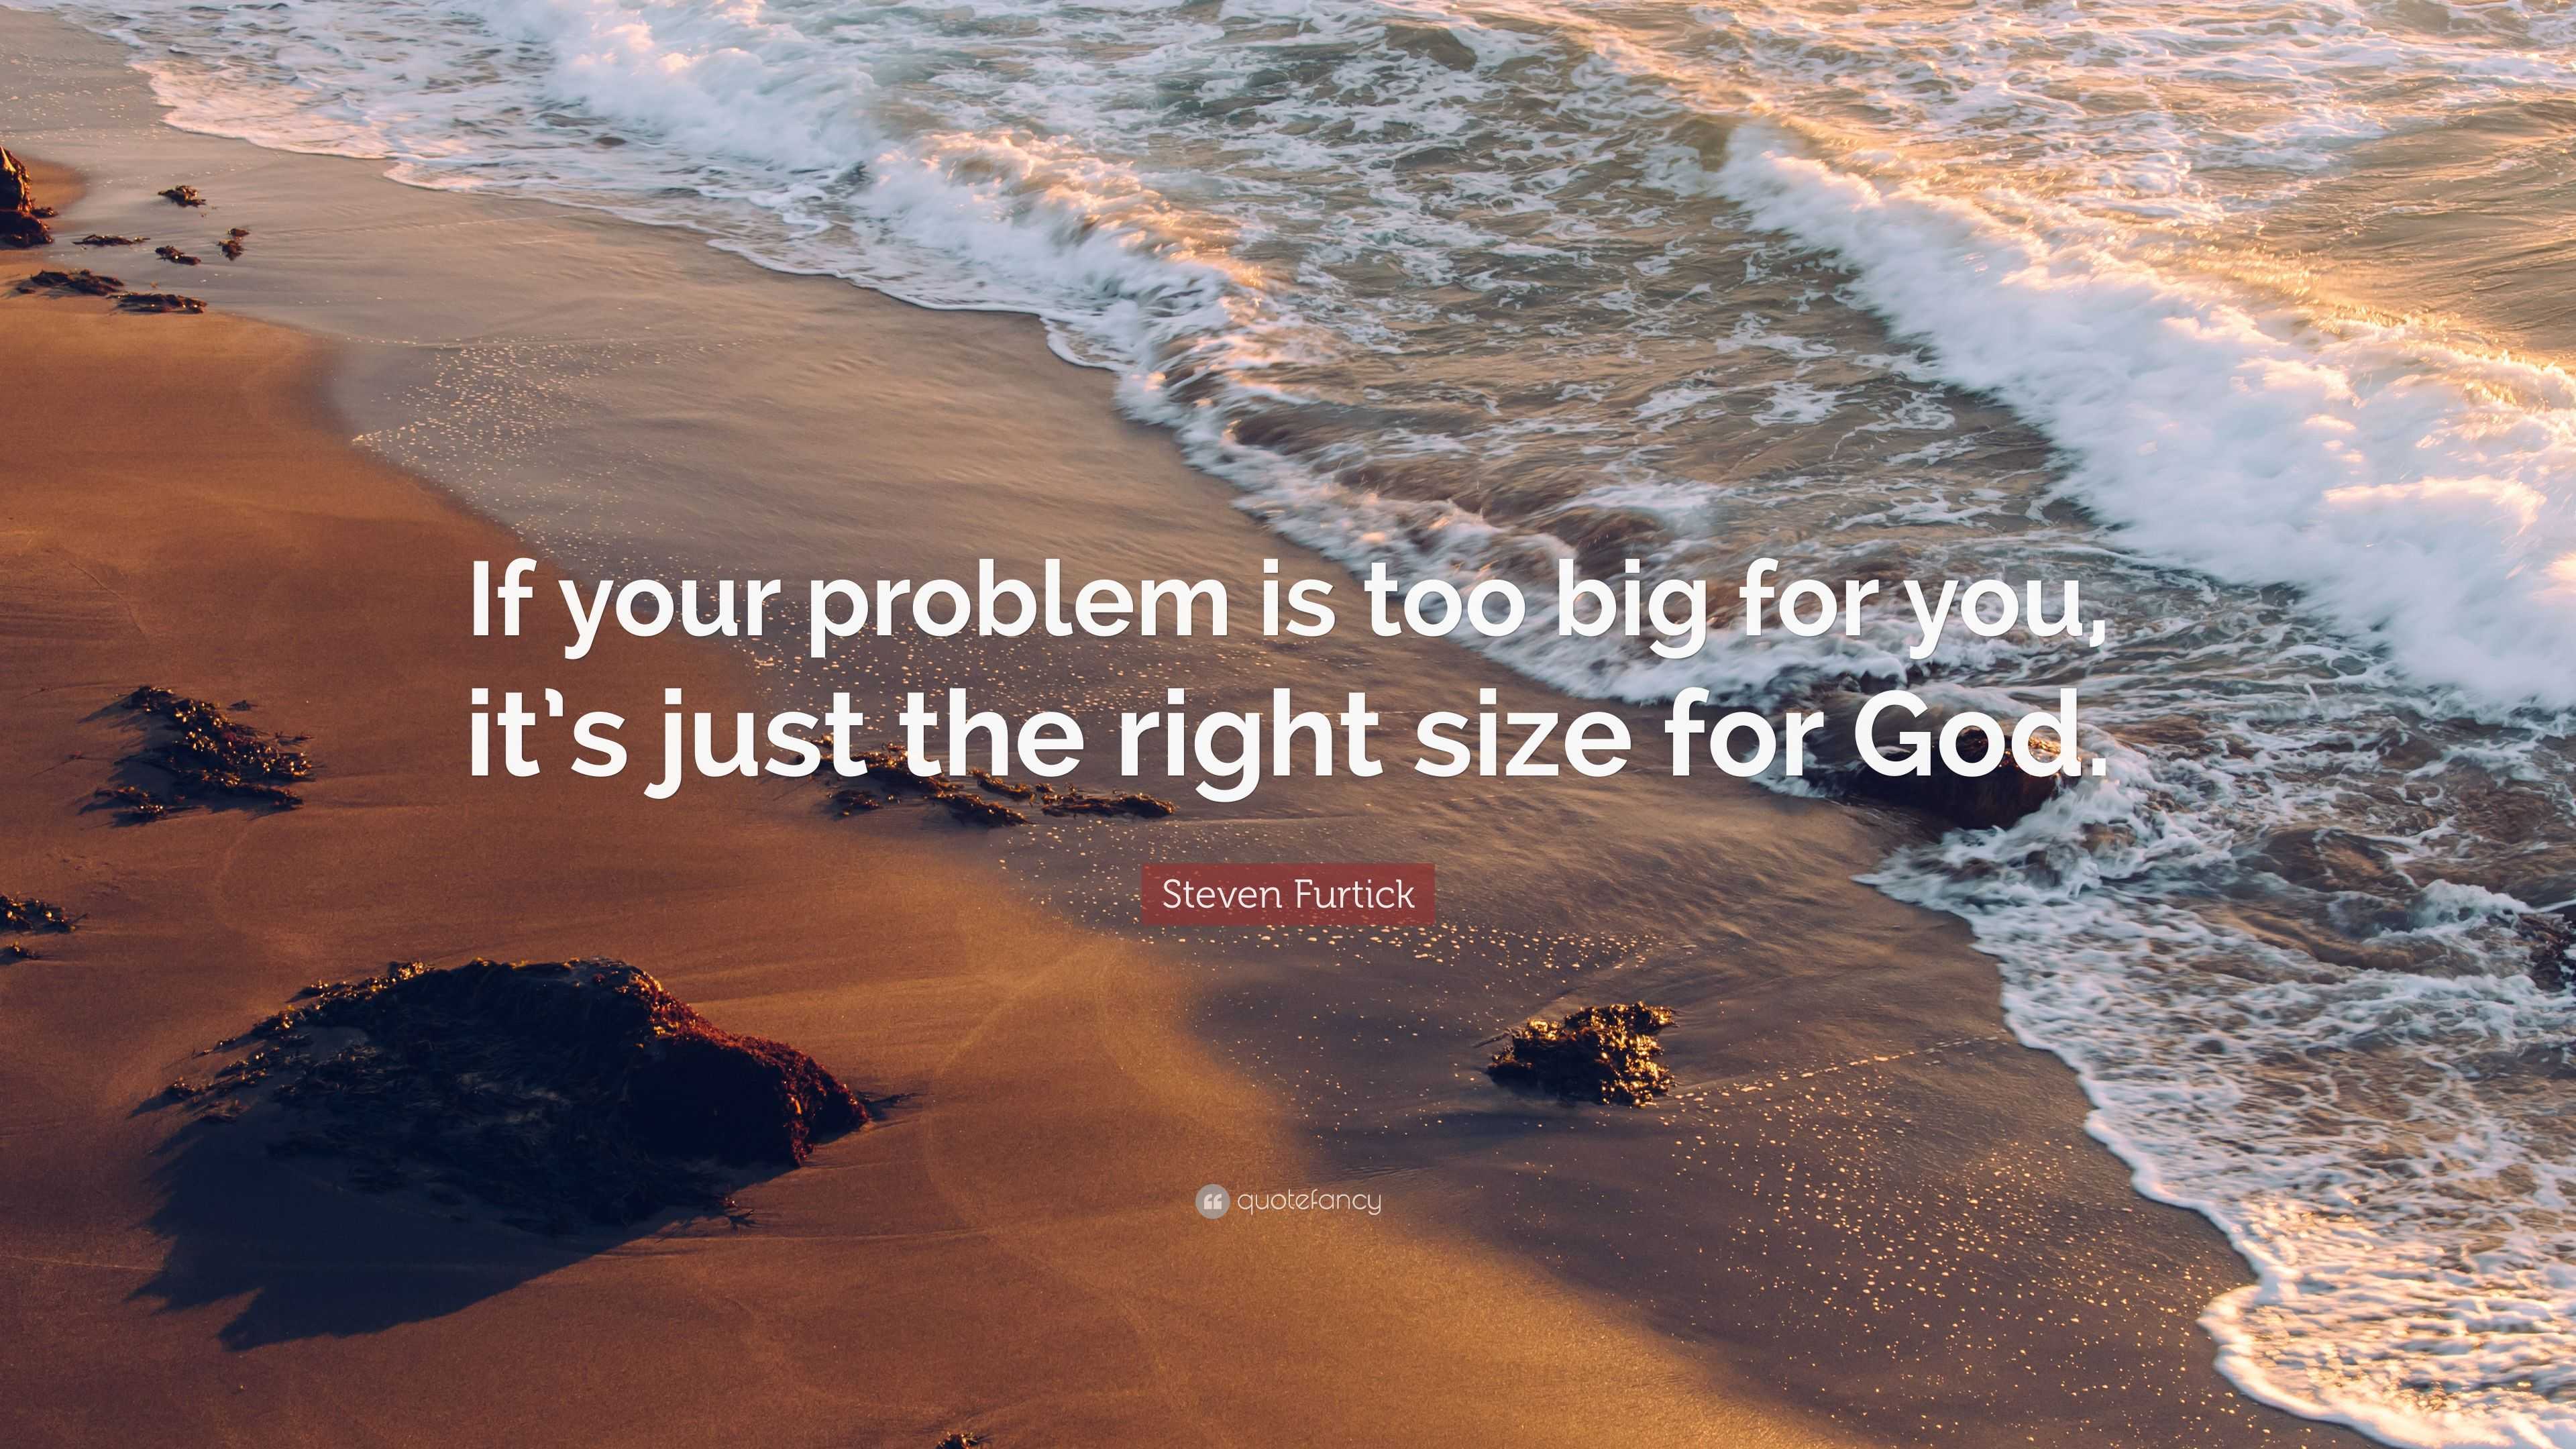 Steven Furtick Quote: “If your problem is too big for you, it's